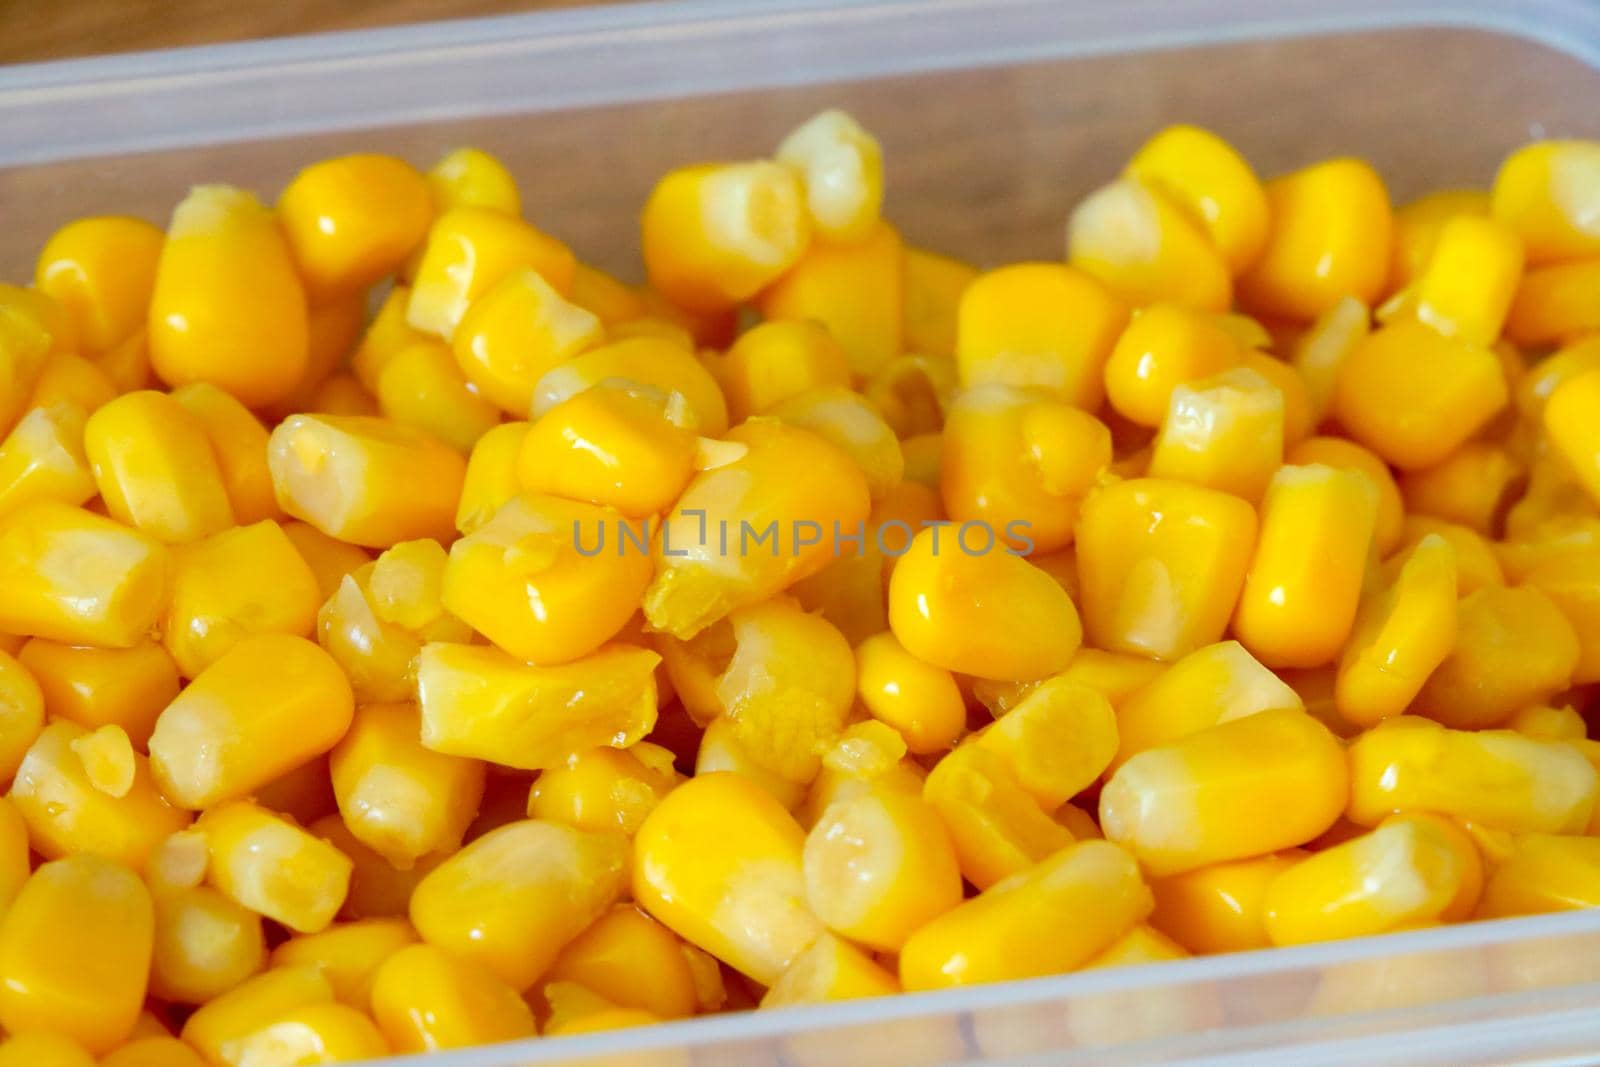 The container contains yellow tasty and sweet corn